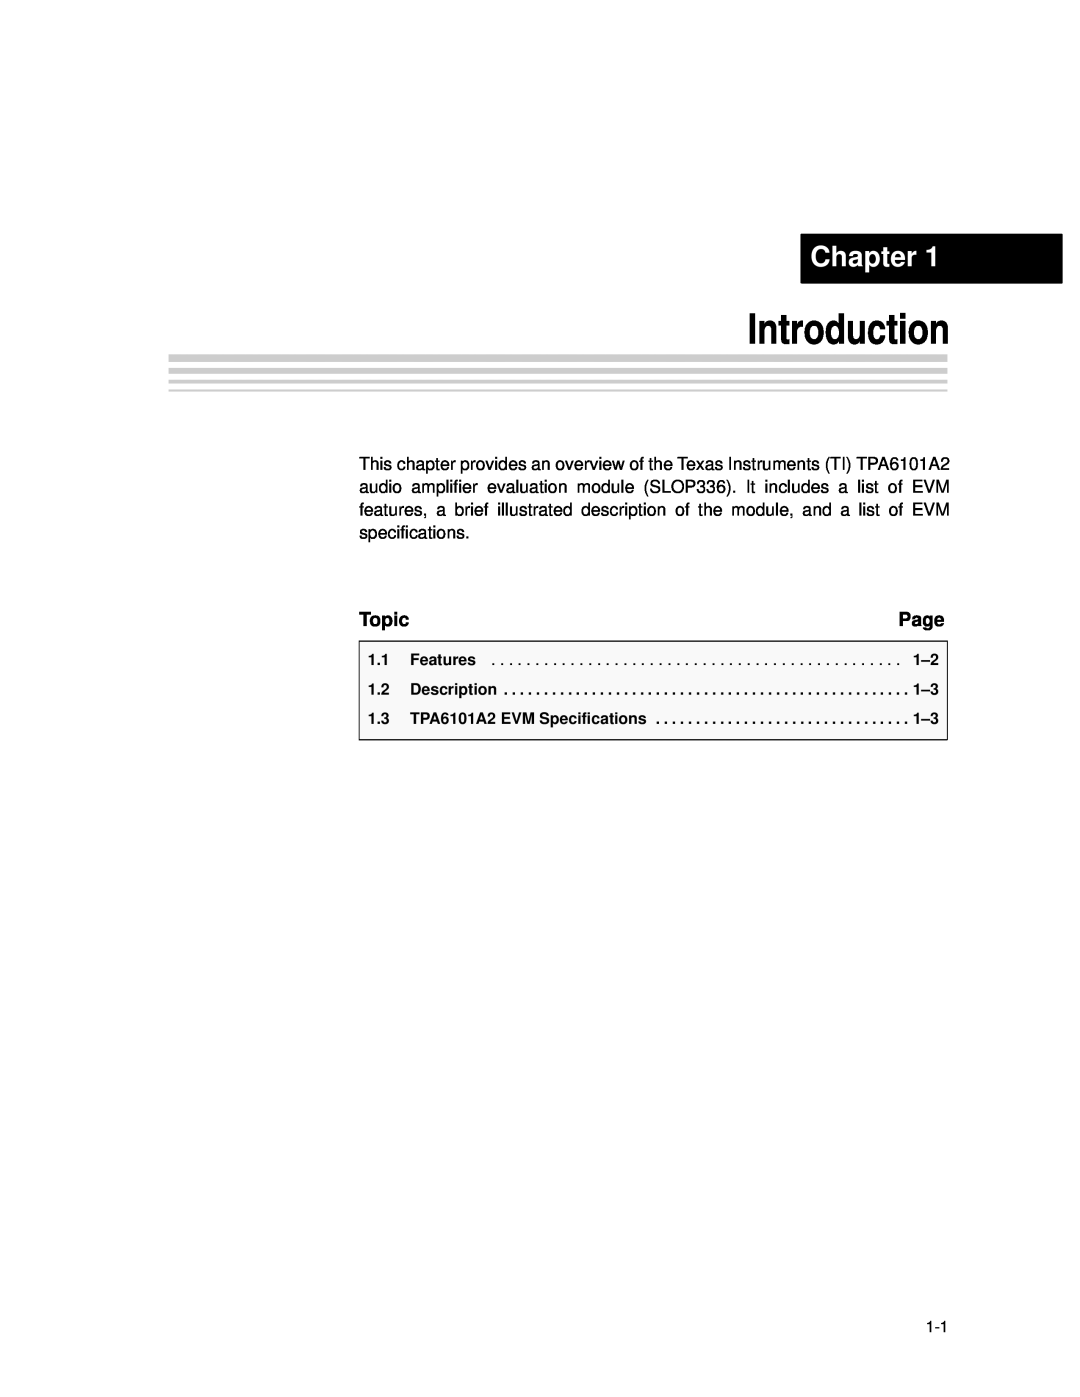 Texas Instruments TPA6101A2 manual Introduction, Chapter, Page, Topic 